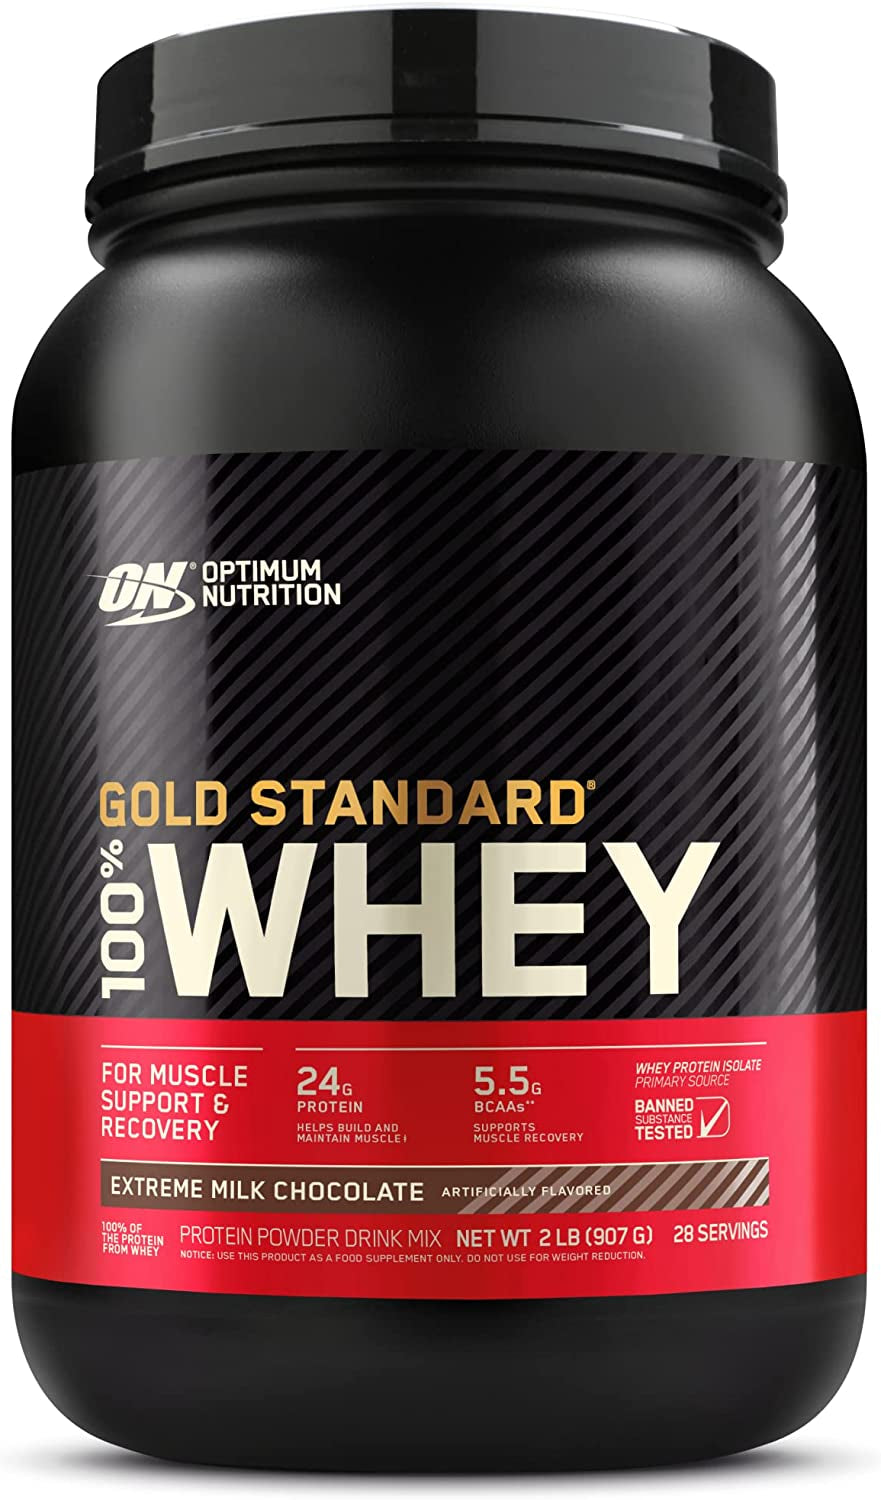 Gold Standard 100% Whey Muscle Building and Recovery Protein Powder with Naturally Occurring Glutamine and BCAA Amino Acids, Extreme Milk Chocolate Flavour, 28 Servings, 896 G